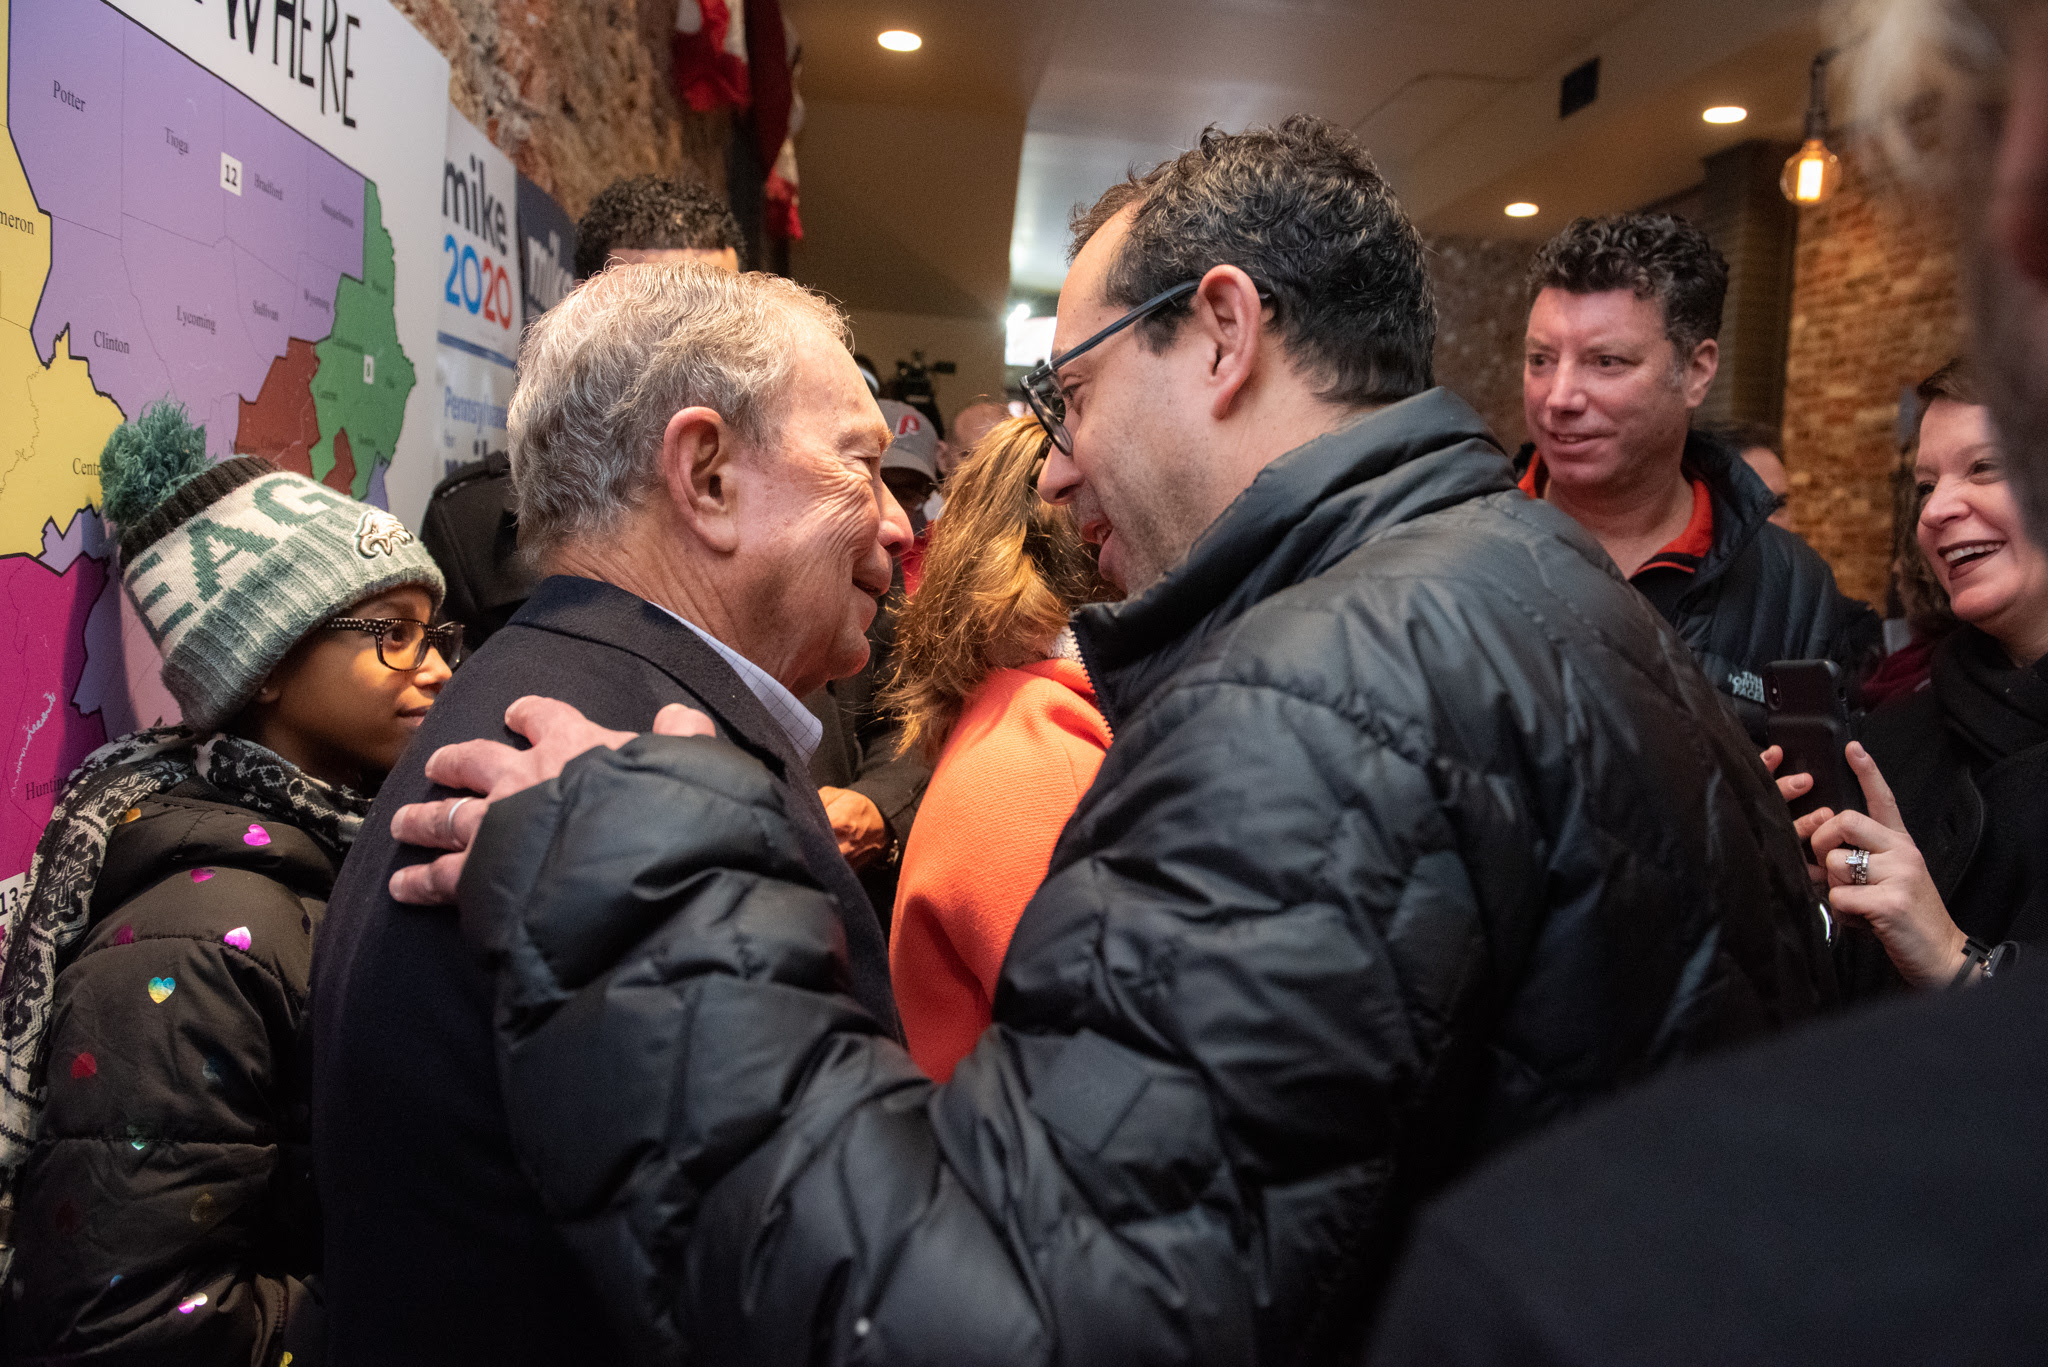 Mike Bloomberg celebrates the opening of the Mike 2020 campaign office in Philadelphia, Pennsylvania on December 21, 2019.